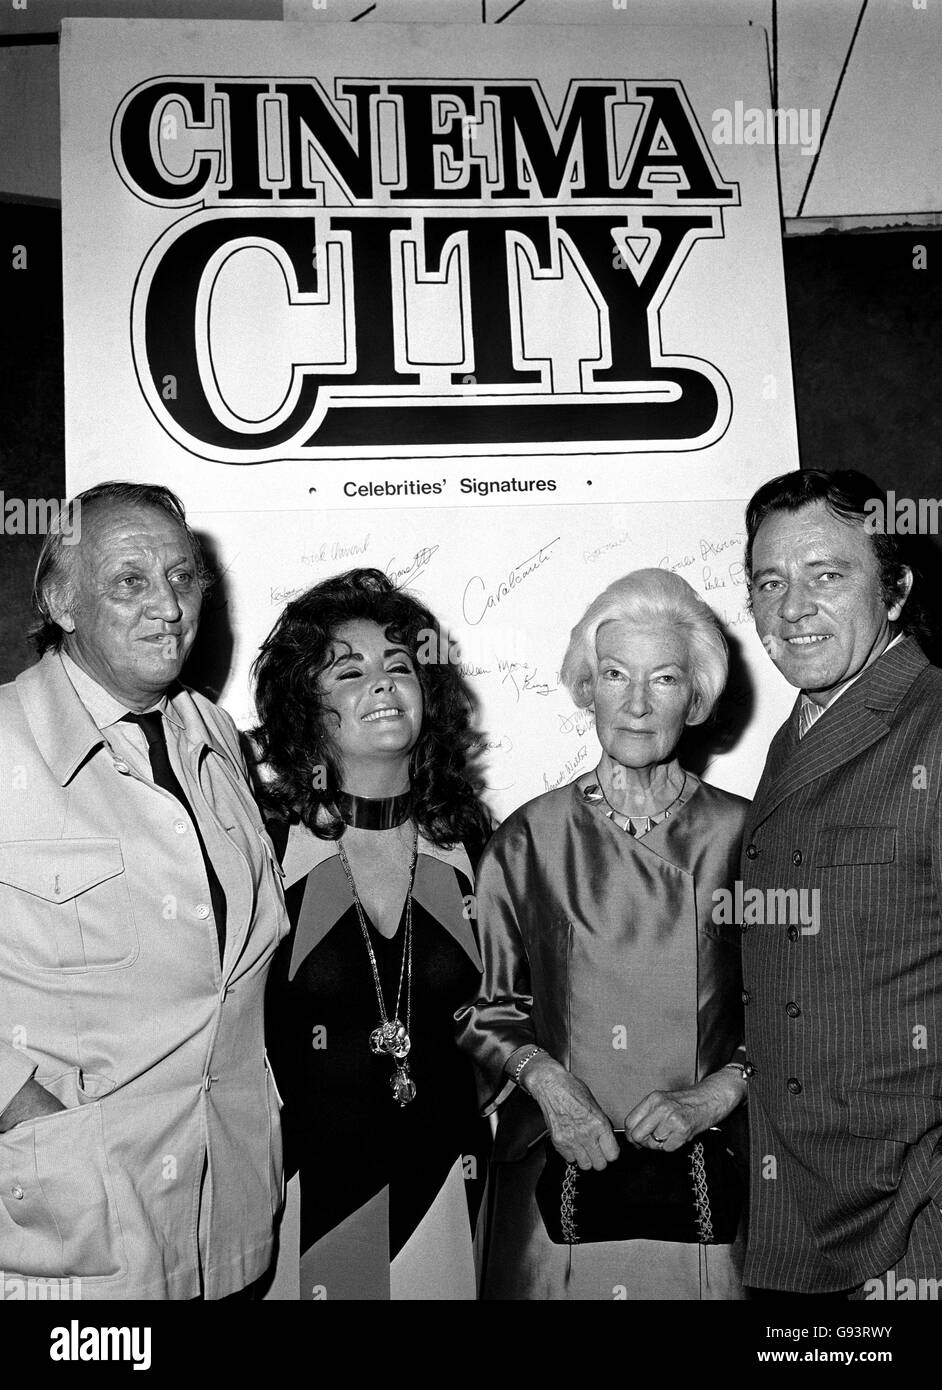 Elizabeth Taylor and Richard Burton (on left), with film critic Dilys powell and director Joeseph Losey. Stock Photo